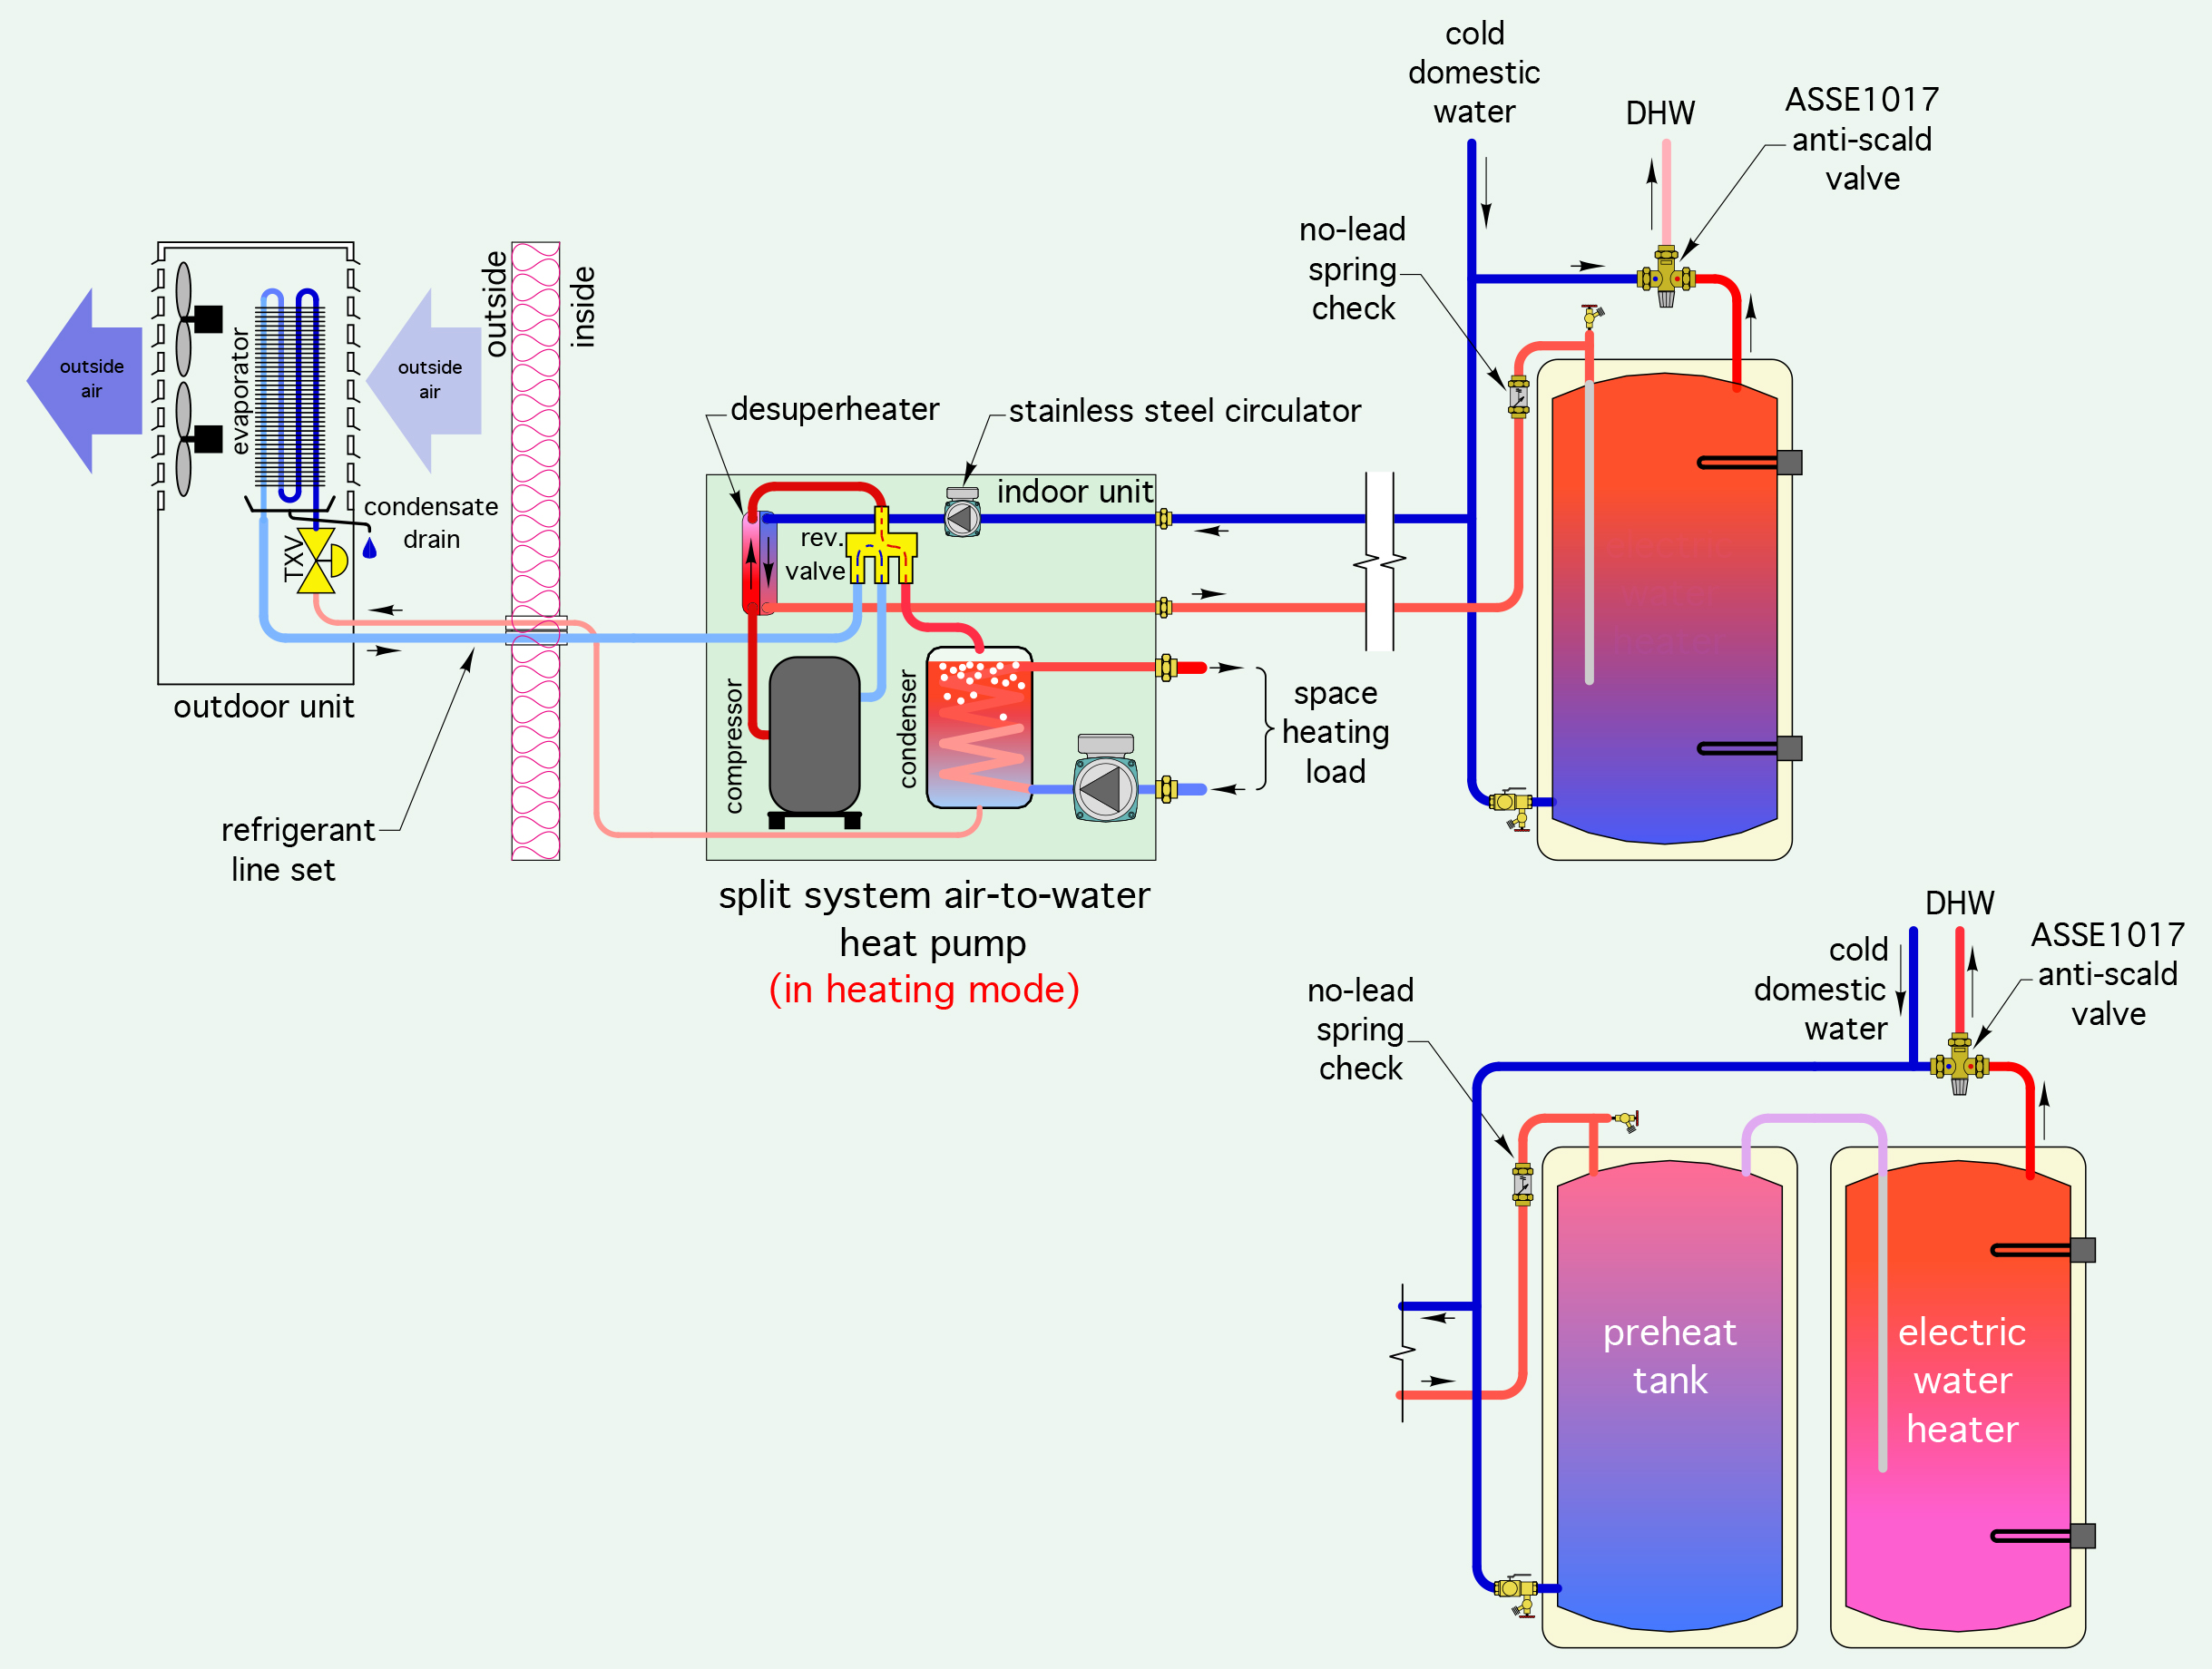 Designing Heat Pump Water Heating Systems